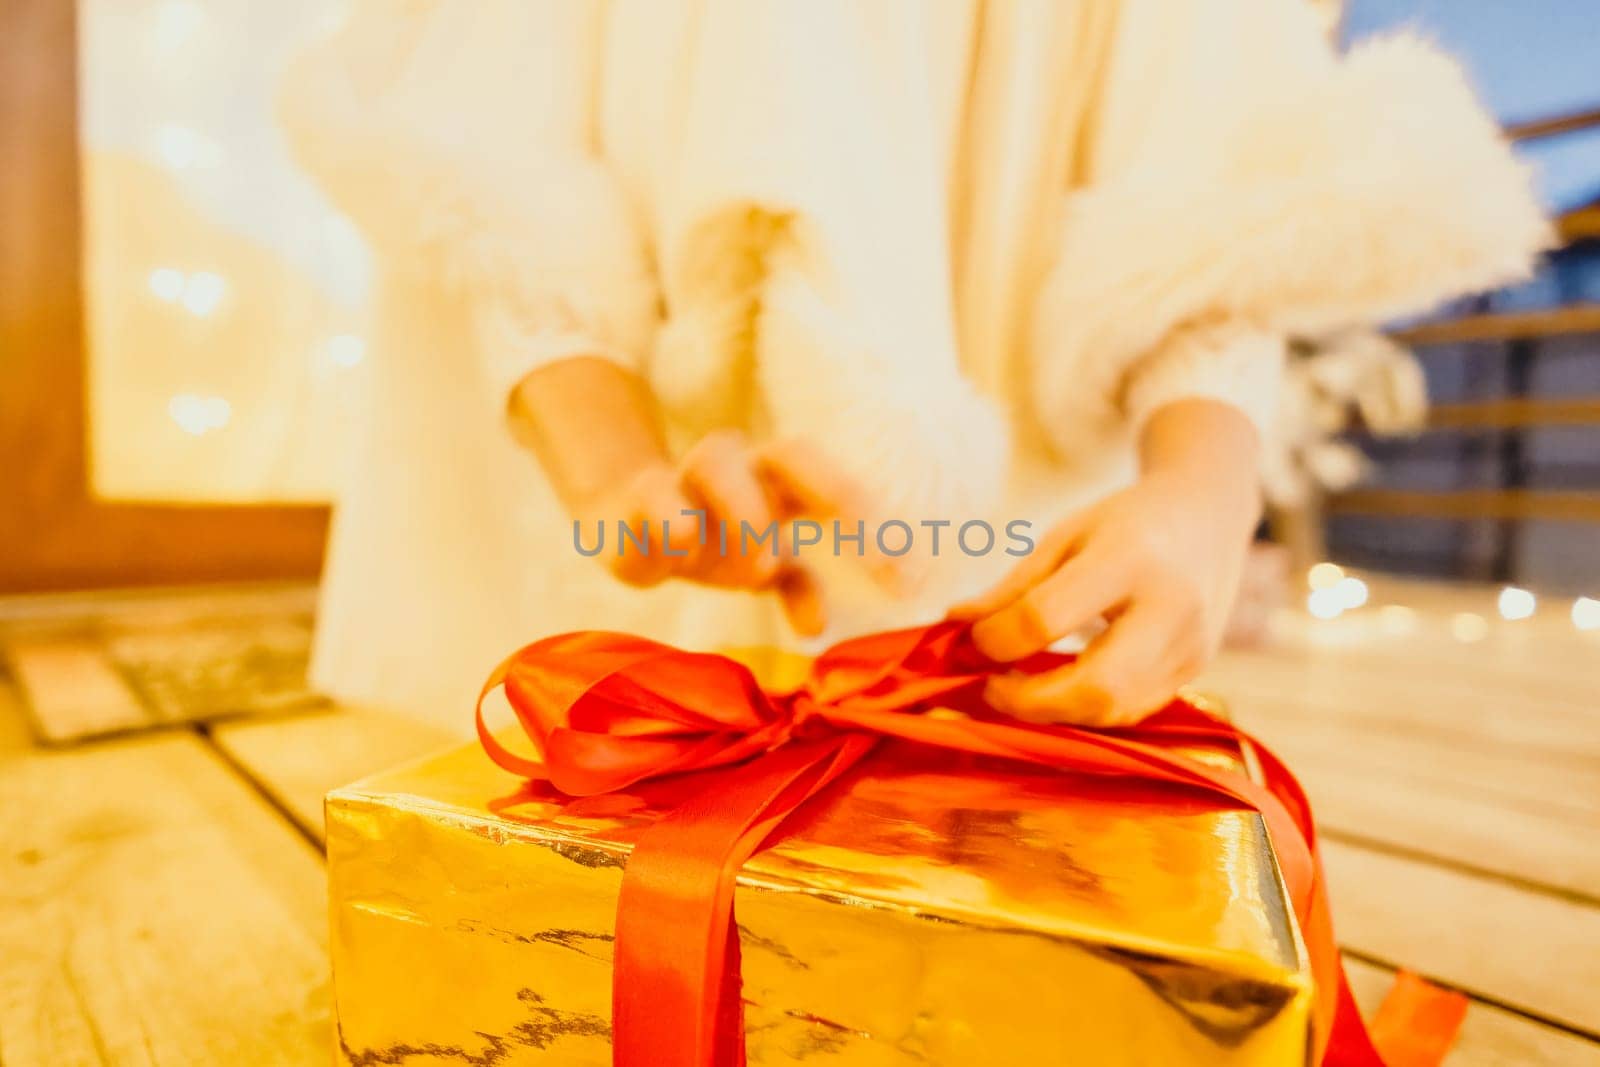 A woman in a white dress is holding a gold box with a red ribbon. She is wearing a crown on her head. The scene takes place in a room with a door and a window. The woman appears to be opening the gift box.